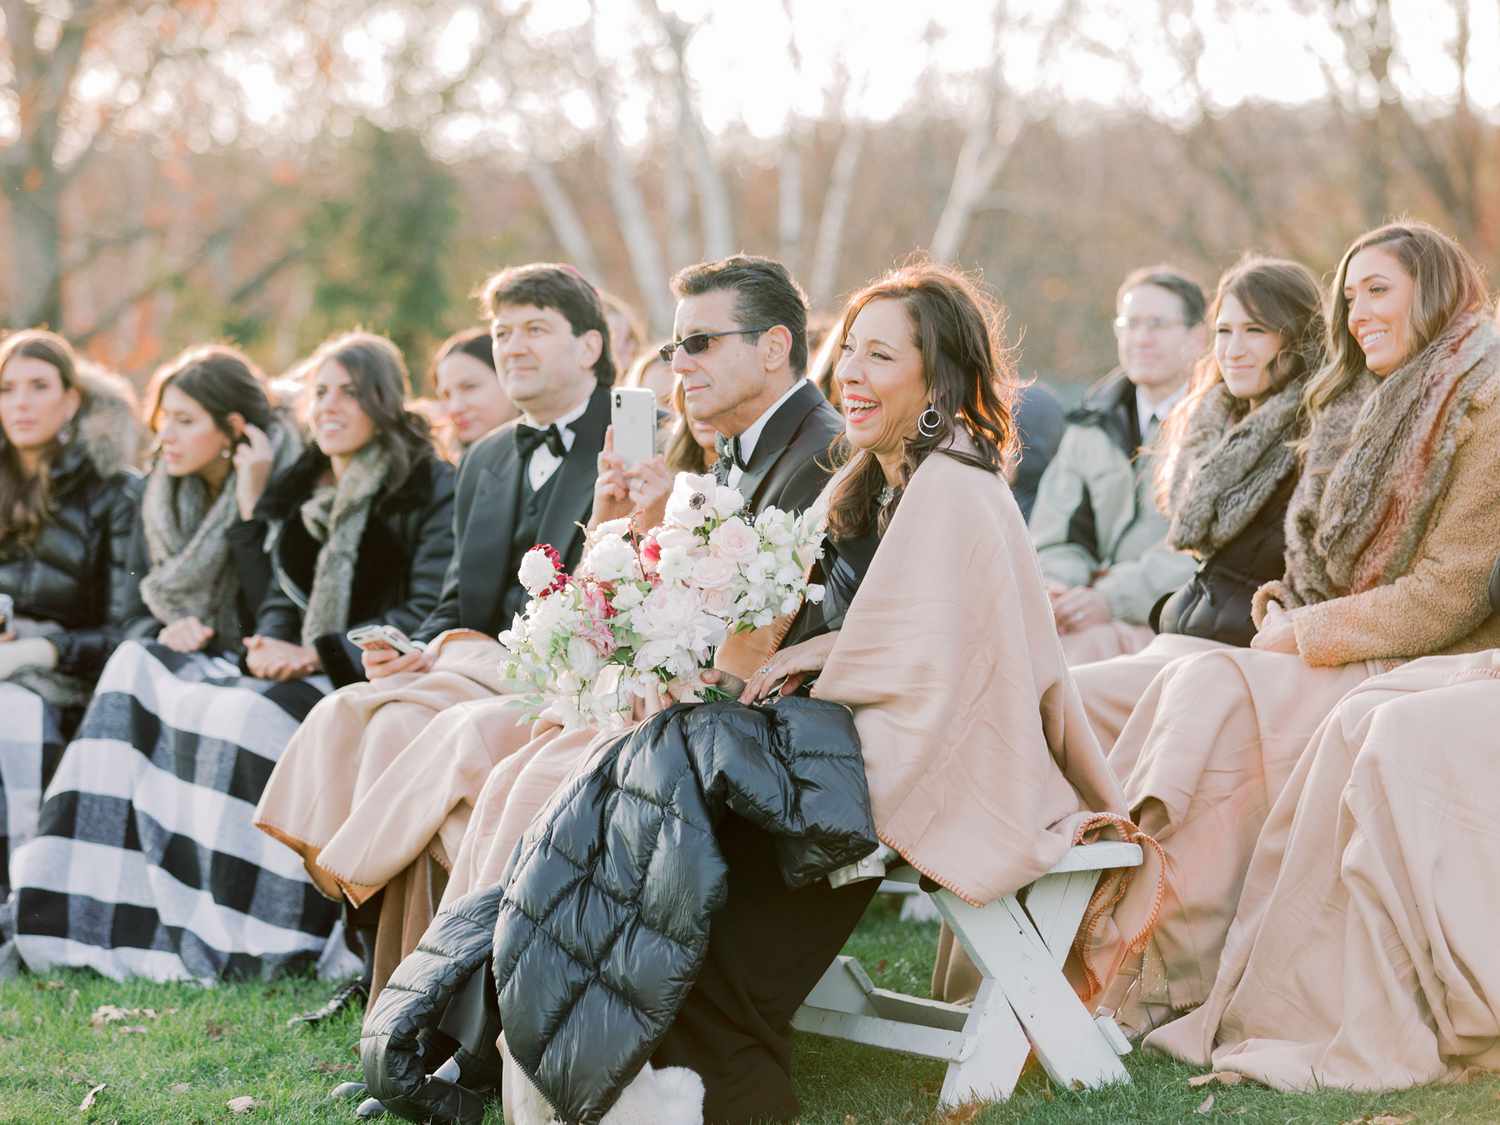 wedding guests with shawls and blankets during outdoor wedding ceremony